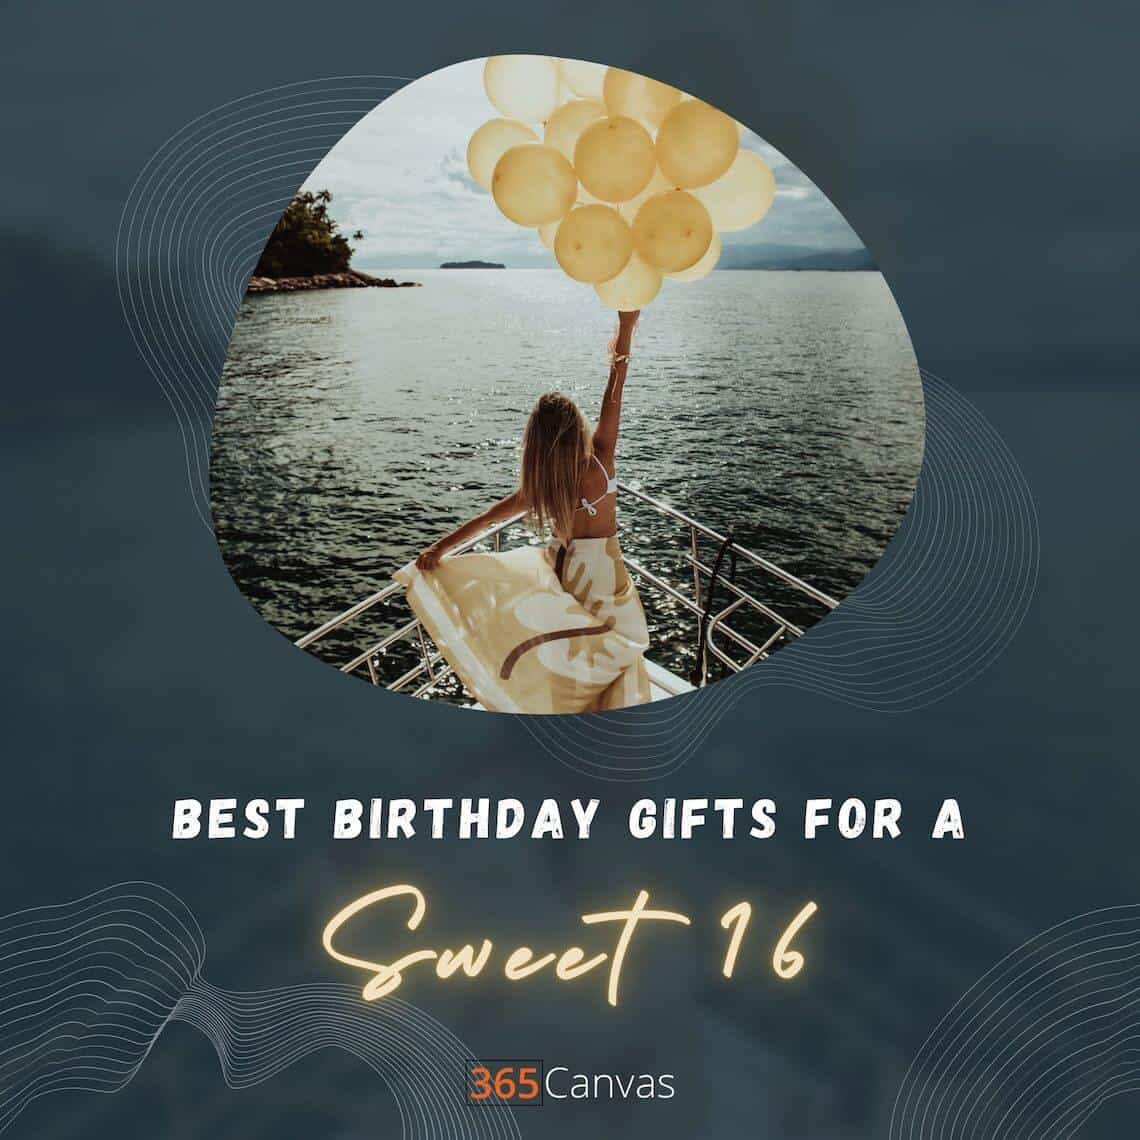 Sweet 16 Gifts: 32 Gift Ideas For A Glam 16th Birthday (2022)